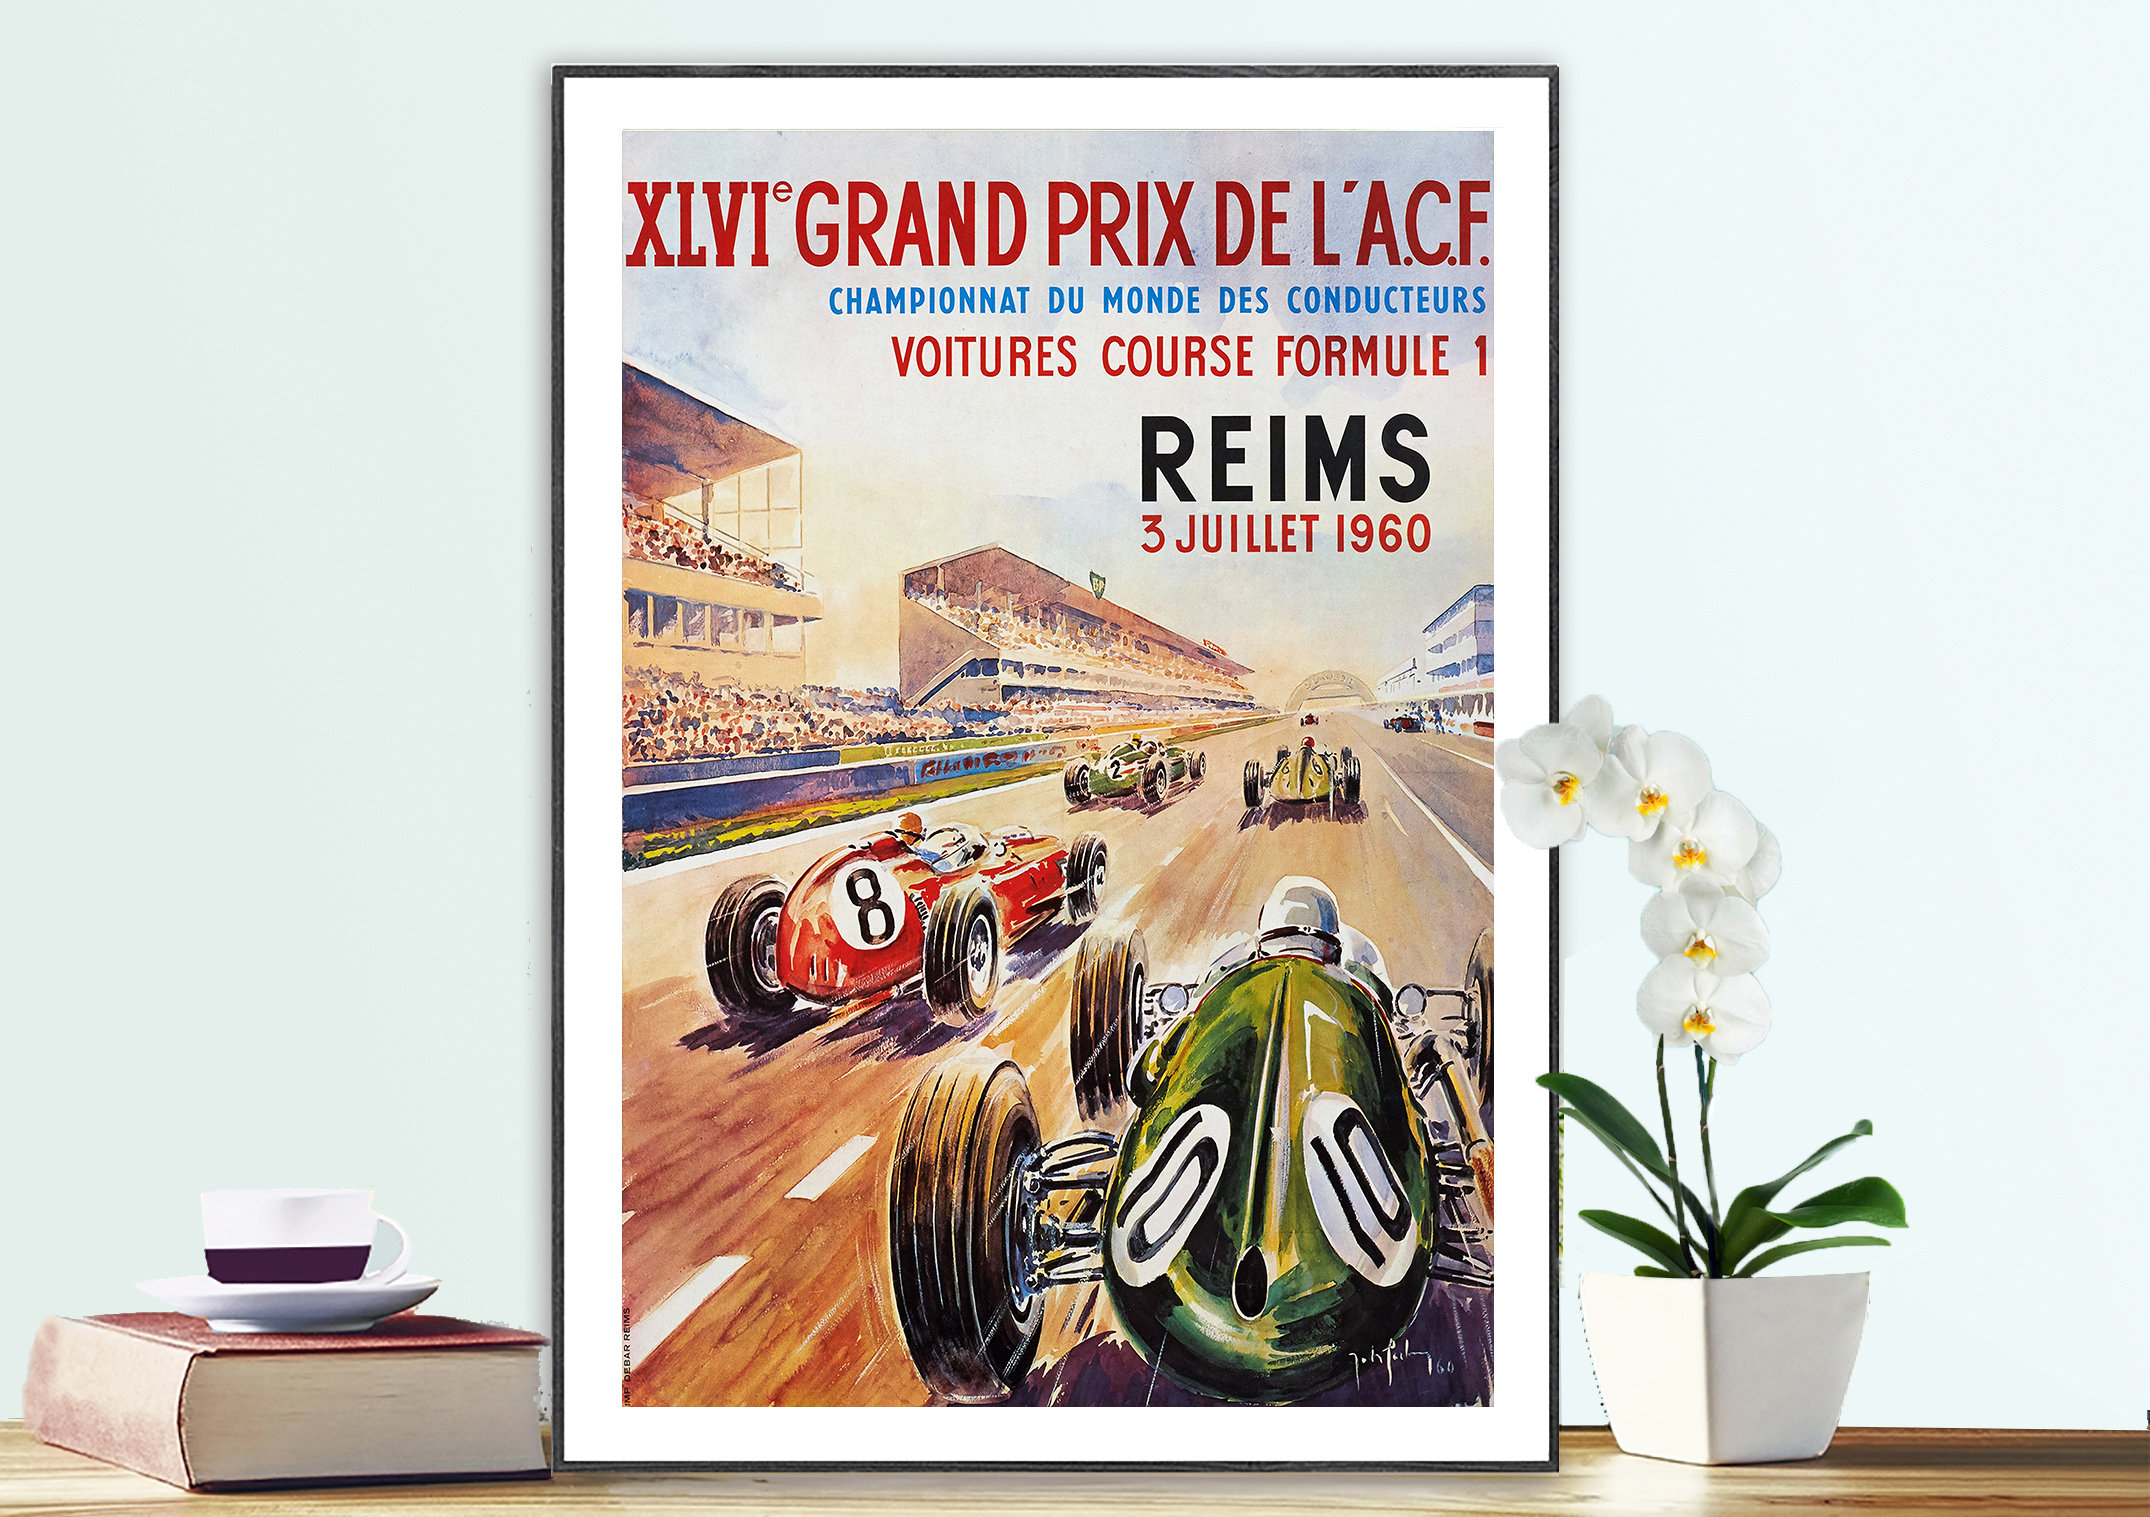 Vintage Reims Grand Prix advertising  poster reproduction